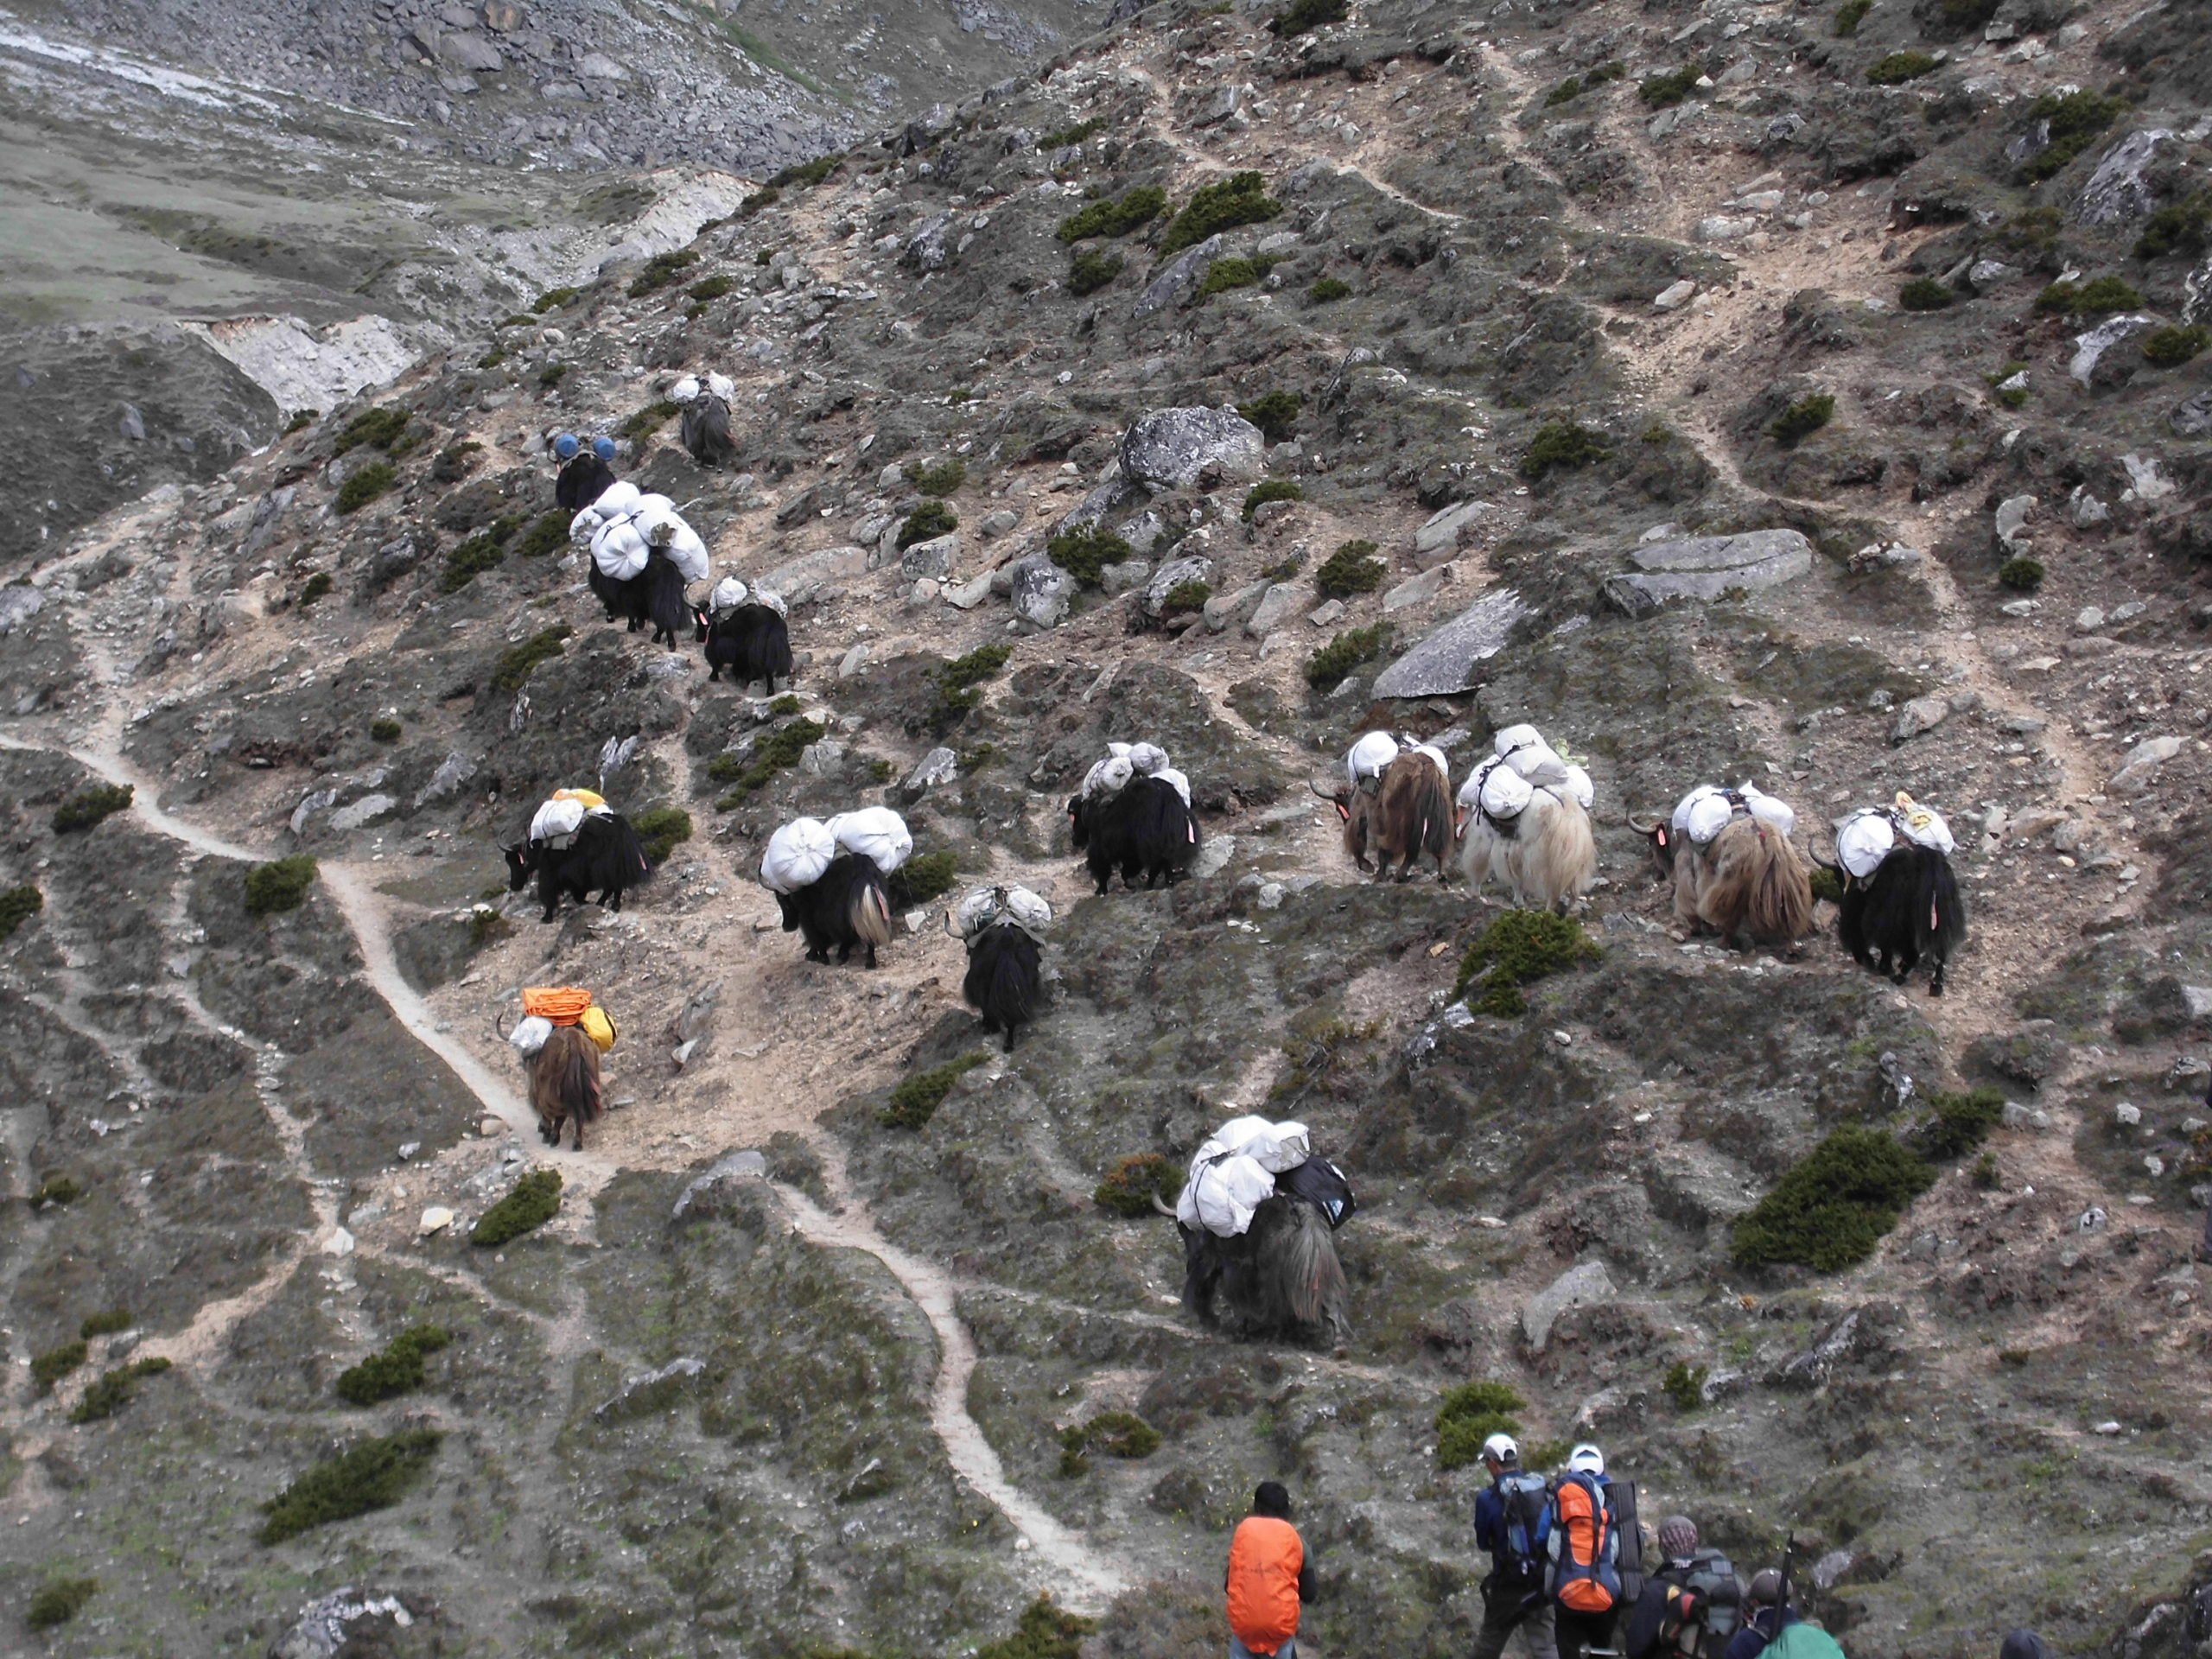 Yaks and porters in the Nepal Himalayas